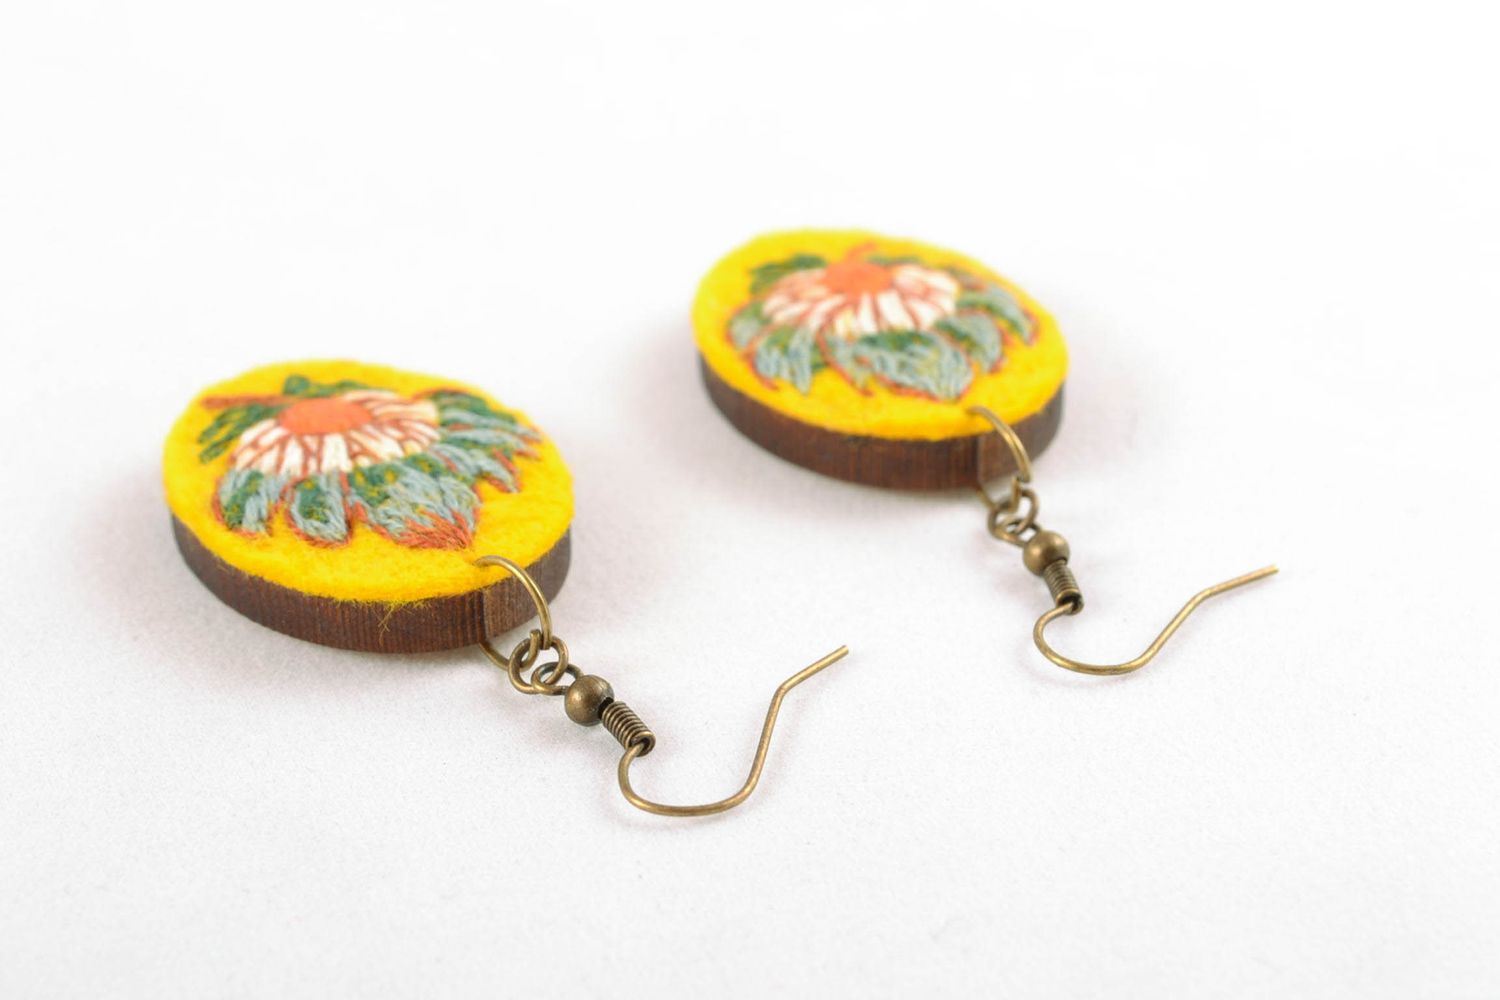 Handmade wooden and felt earrings with embroidery photo 4